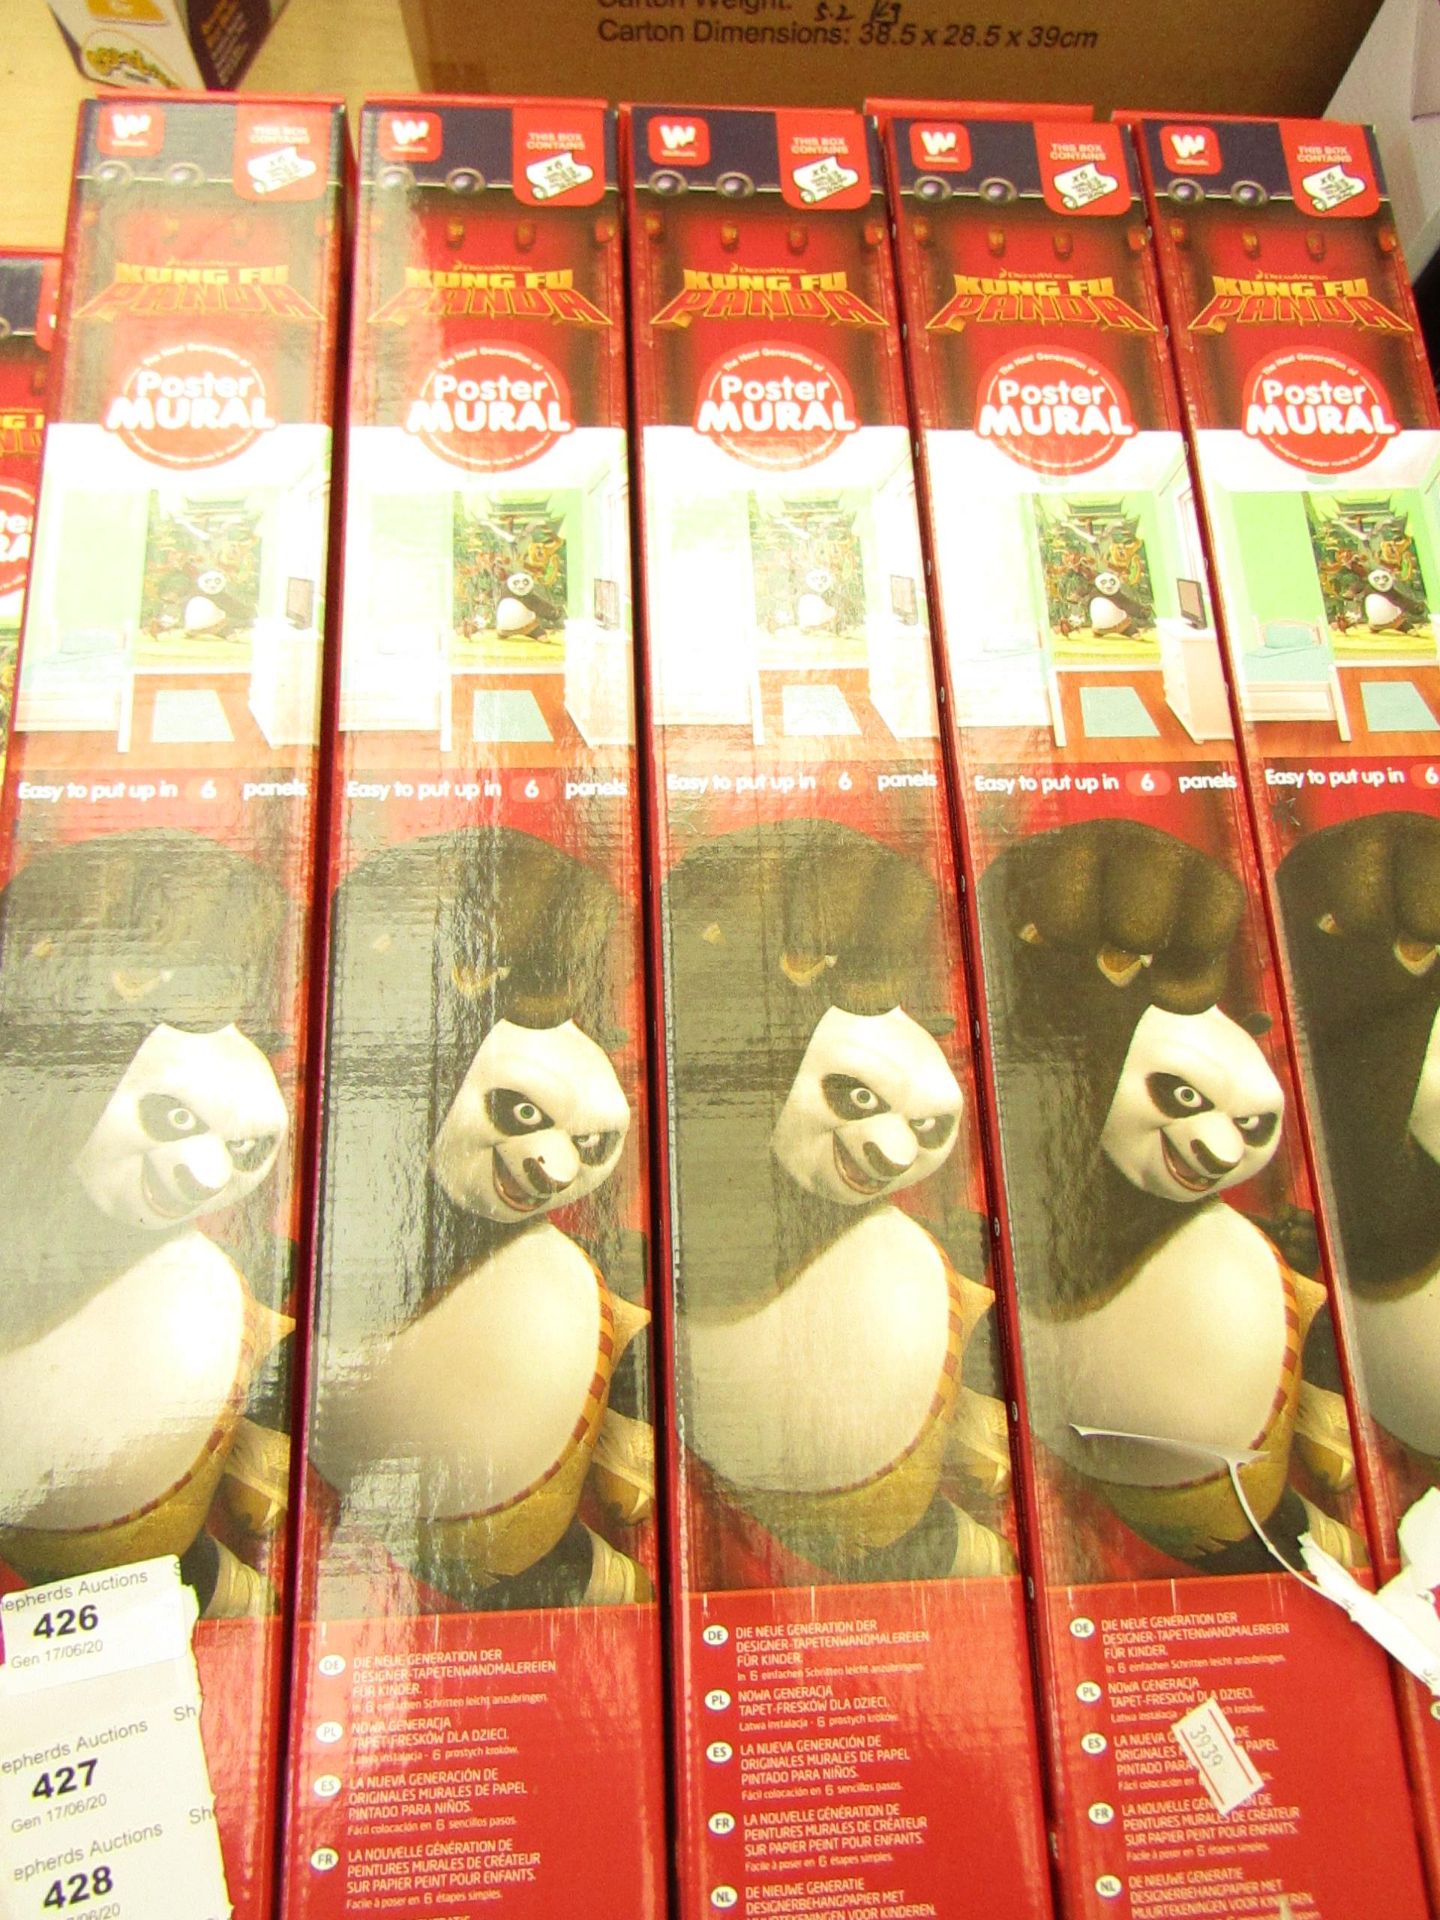 Wallatstic Kung Fu Panda Poster Mral. Easy To put up in 6 Pieces. Overall Size 8ft x 5ft. New &